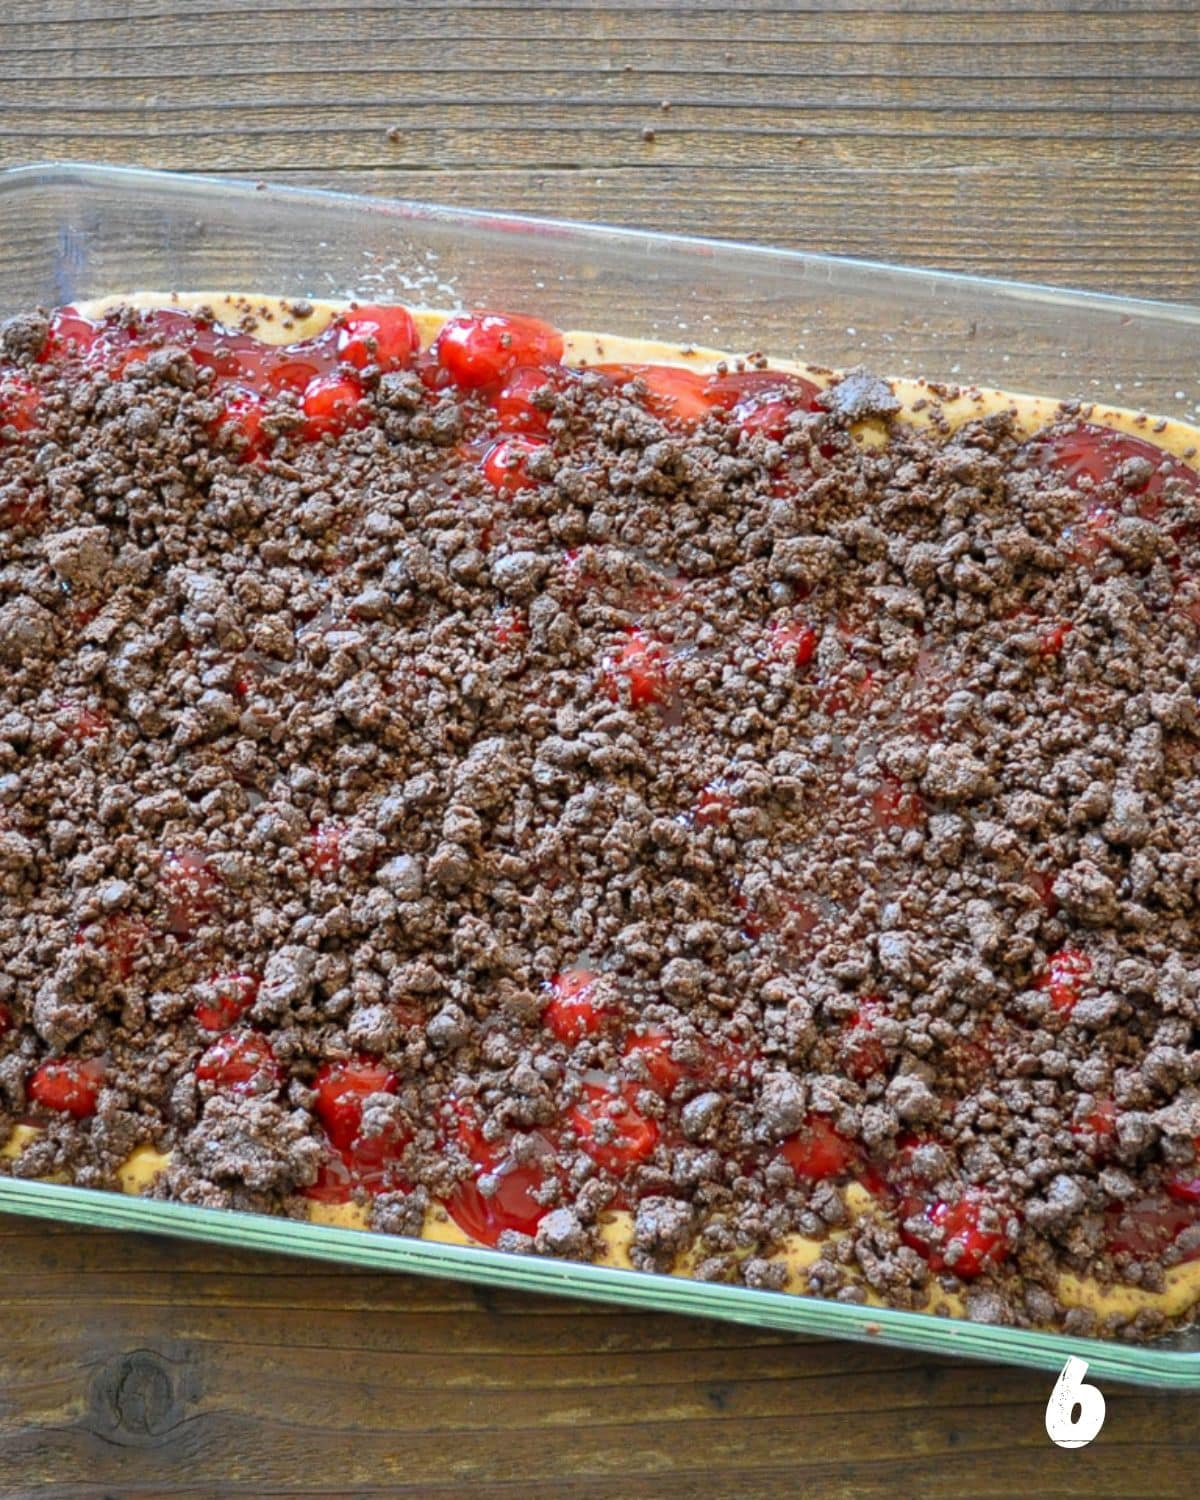 Chocolate crumb topping over cherries in a baking dish.